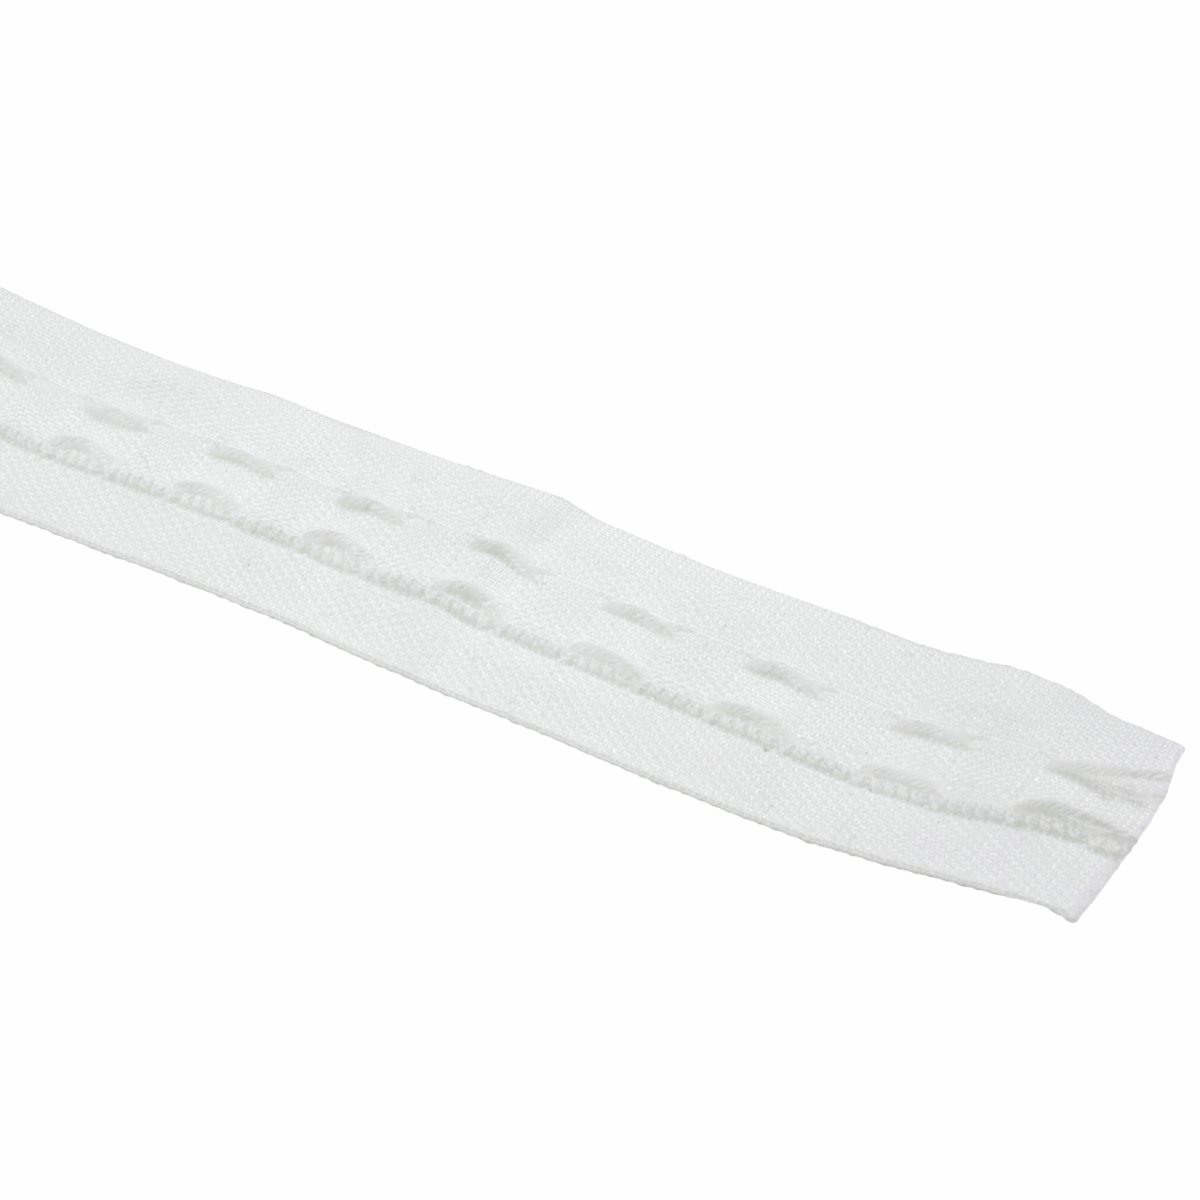 Curtain Tape: Woven Pocket Tape: Premium Quality 28mm (1in): White